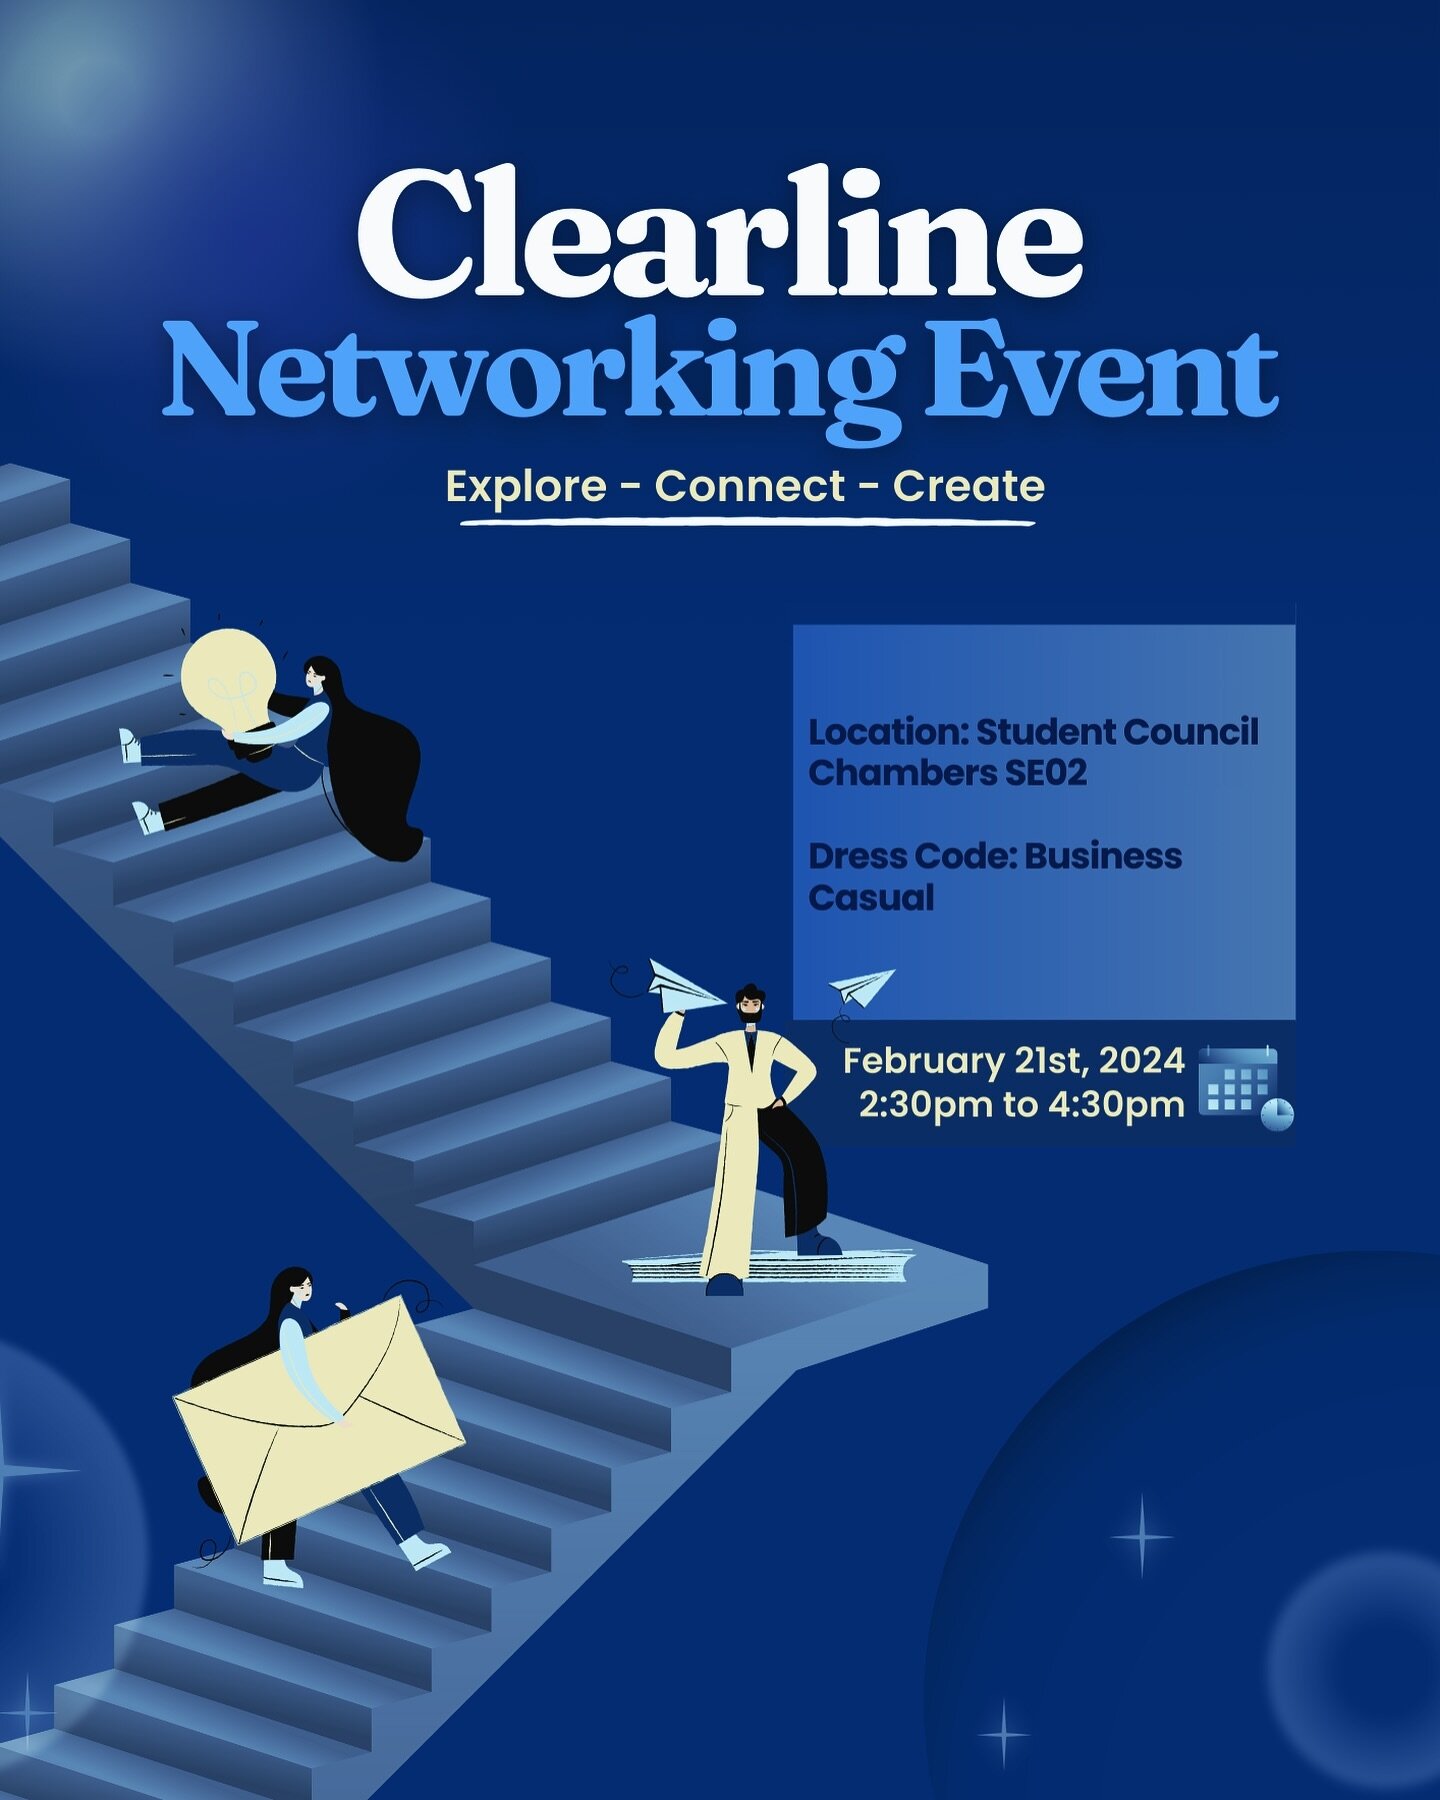 Join us for an engaging event hosted by Clearline on February 21st! The event will kick off with a presentation lasting 20 minutes, followed by networking opportunities for the remainder of the time. Don&rsquo;t miss out on the chance to connect with